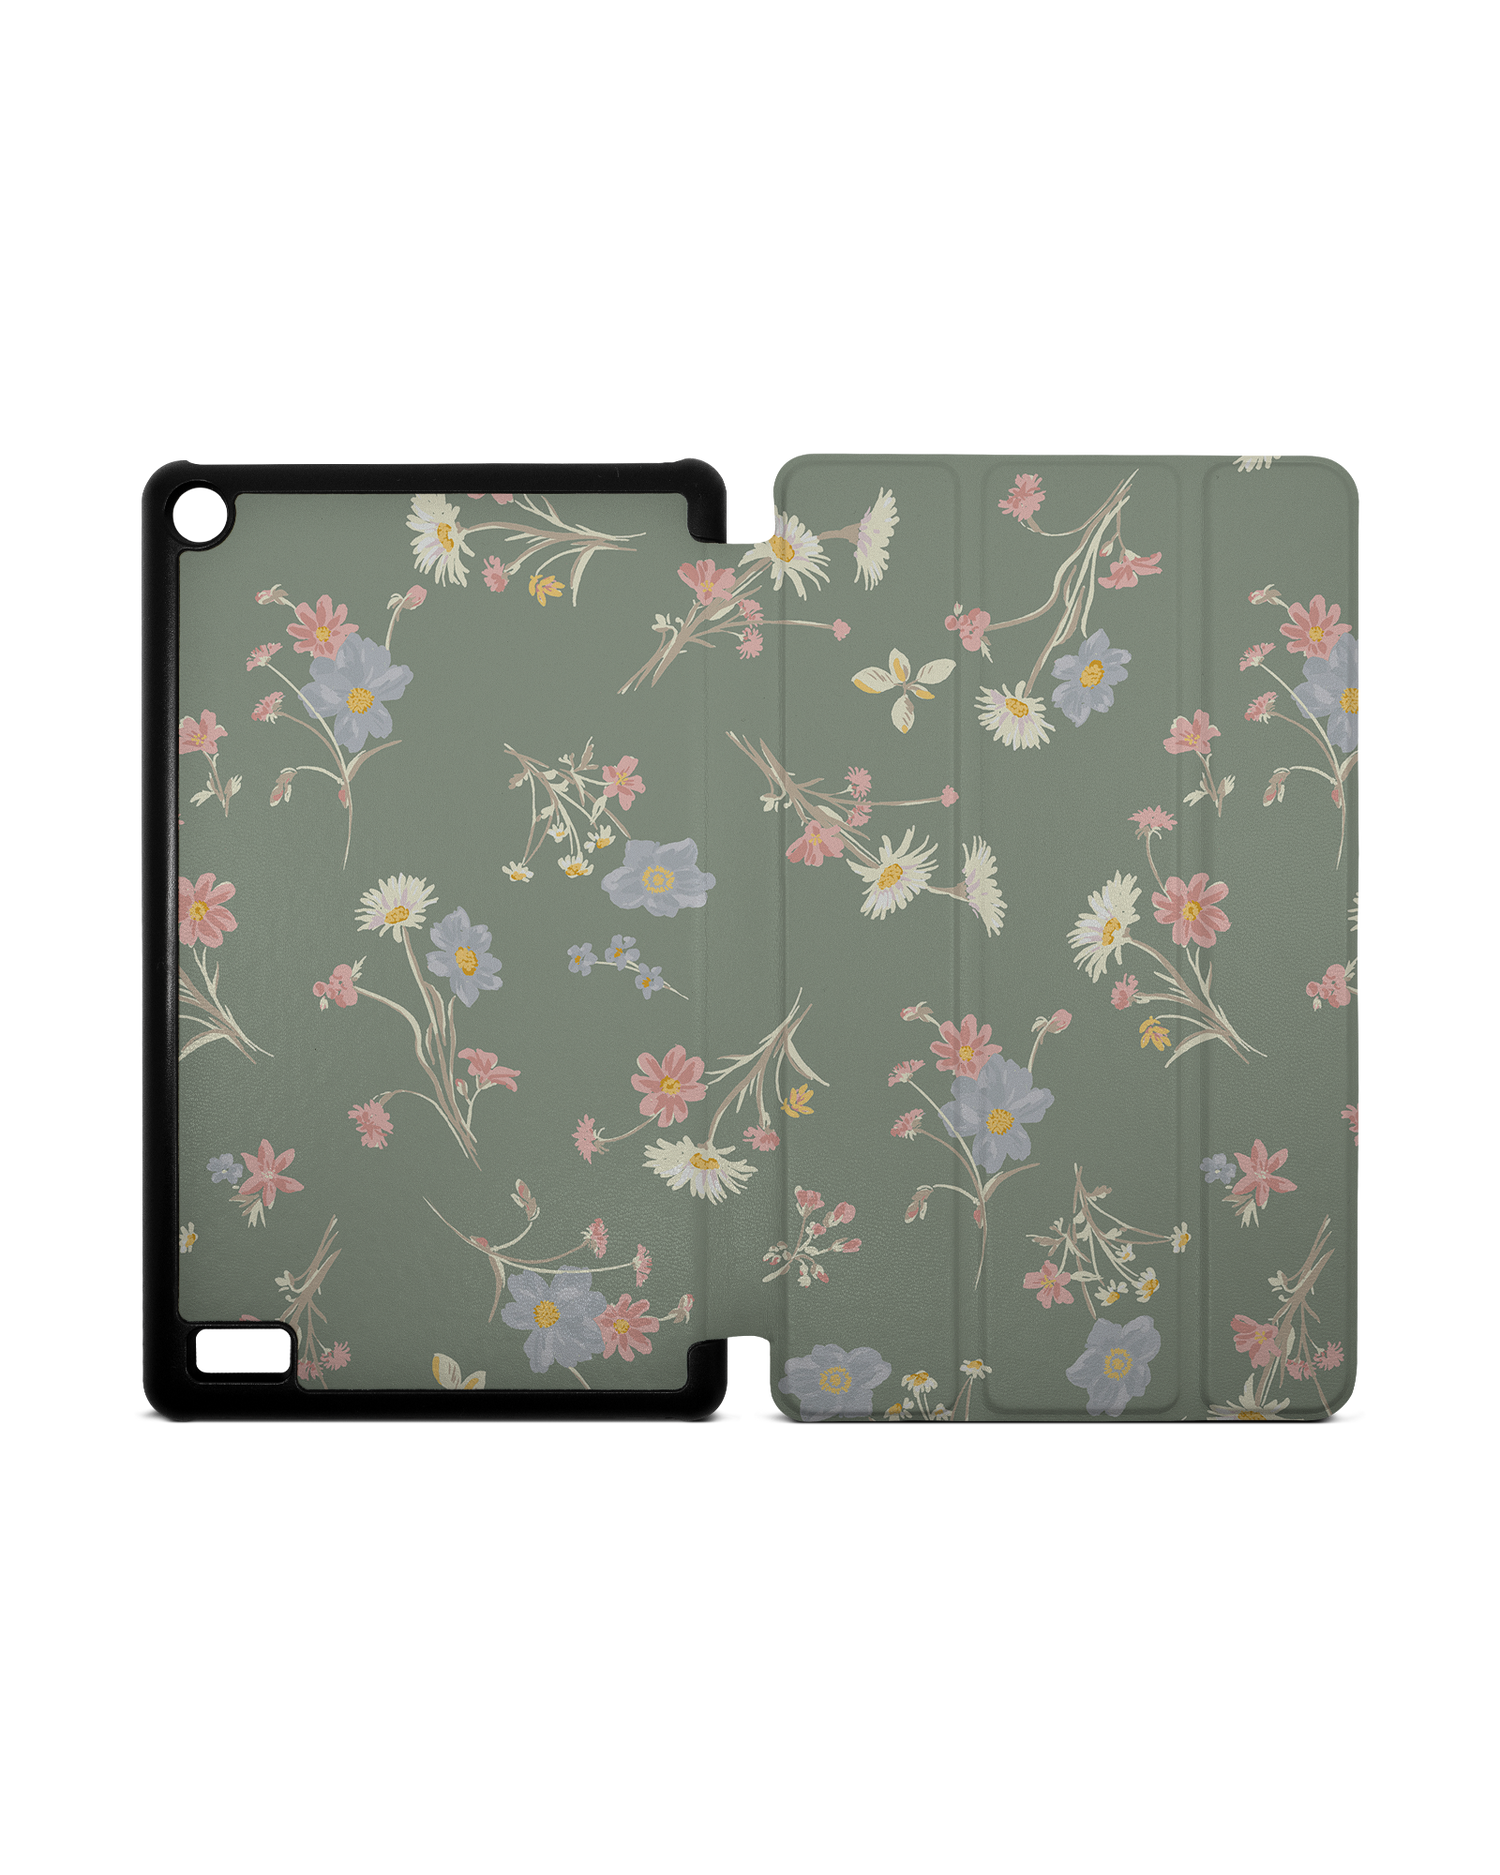 Wild Flower Sprigs Tablet Smart Case for Amazon Fire 7: Opened